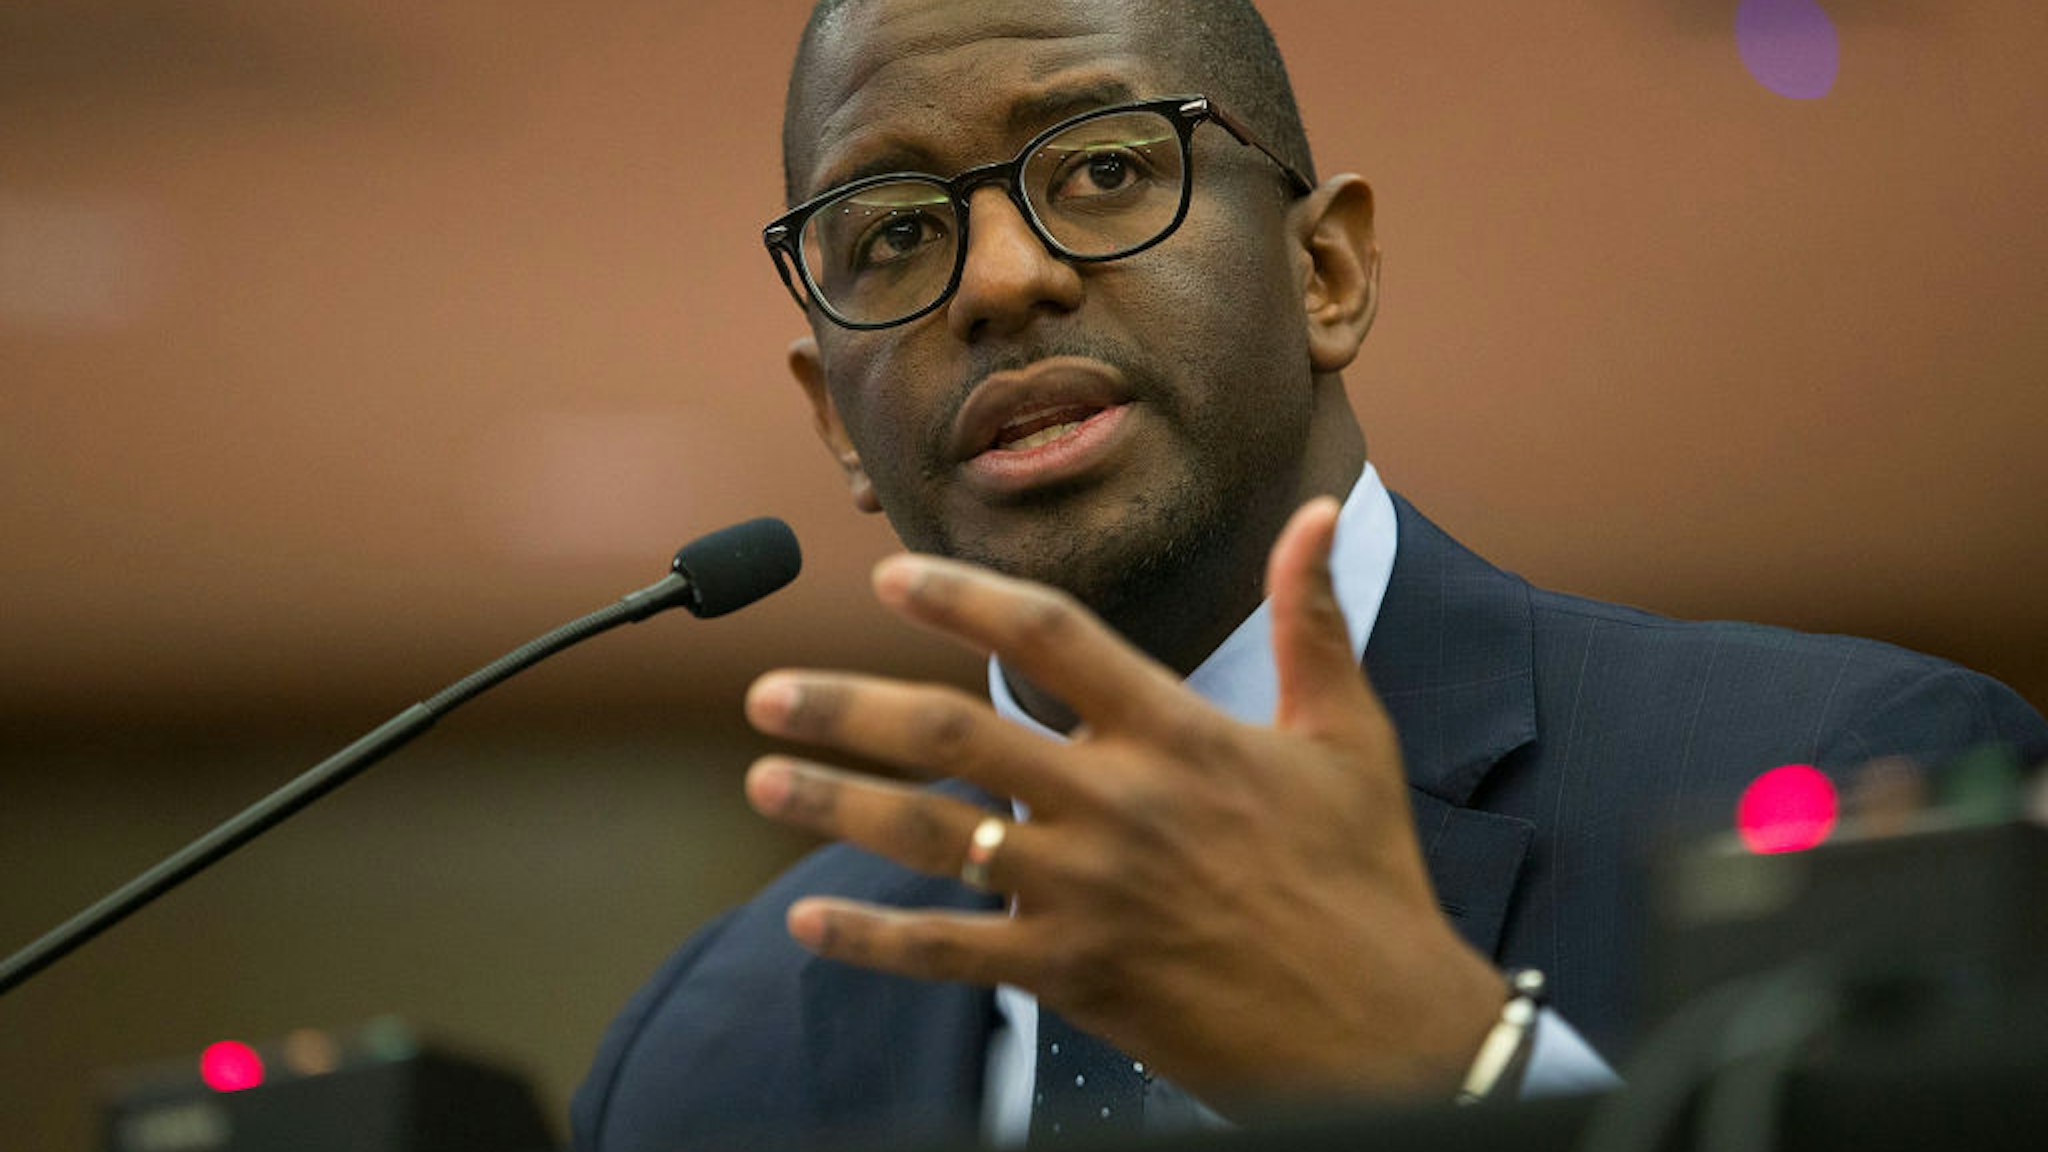 Andrew Gillum, Forward Florida Chair, speaks during The Elections Subcommittee field hearing on 'Voting Rights and Election Administration in Florida' at the Broward County Governmental Center on May 06, 2019 in Fort Lauderdale, Florida.